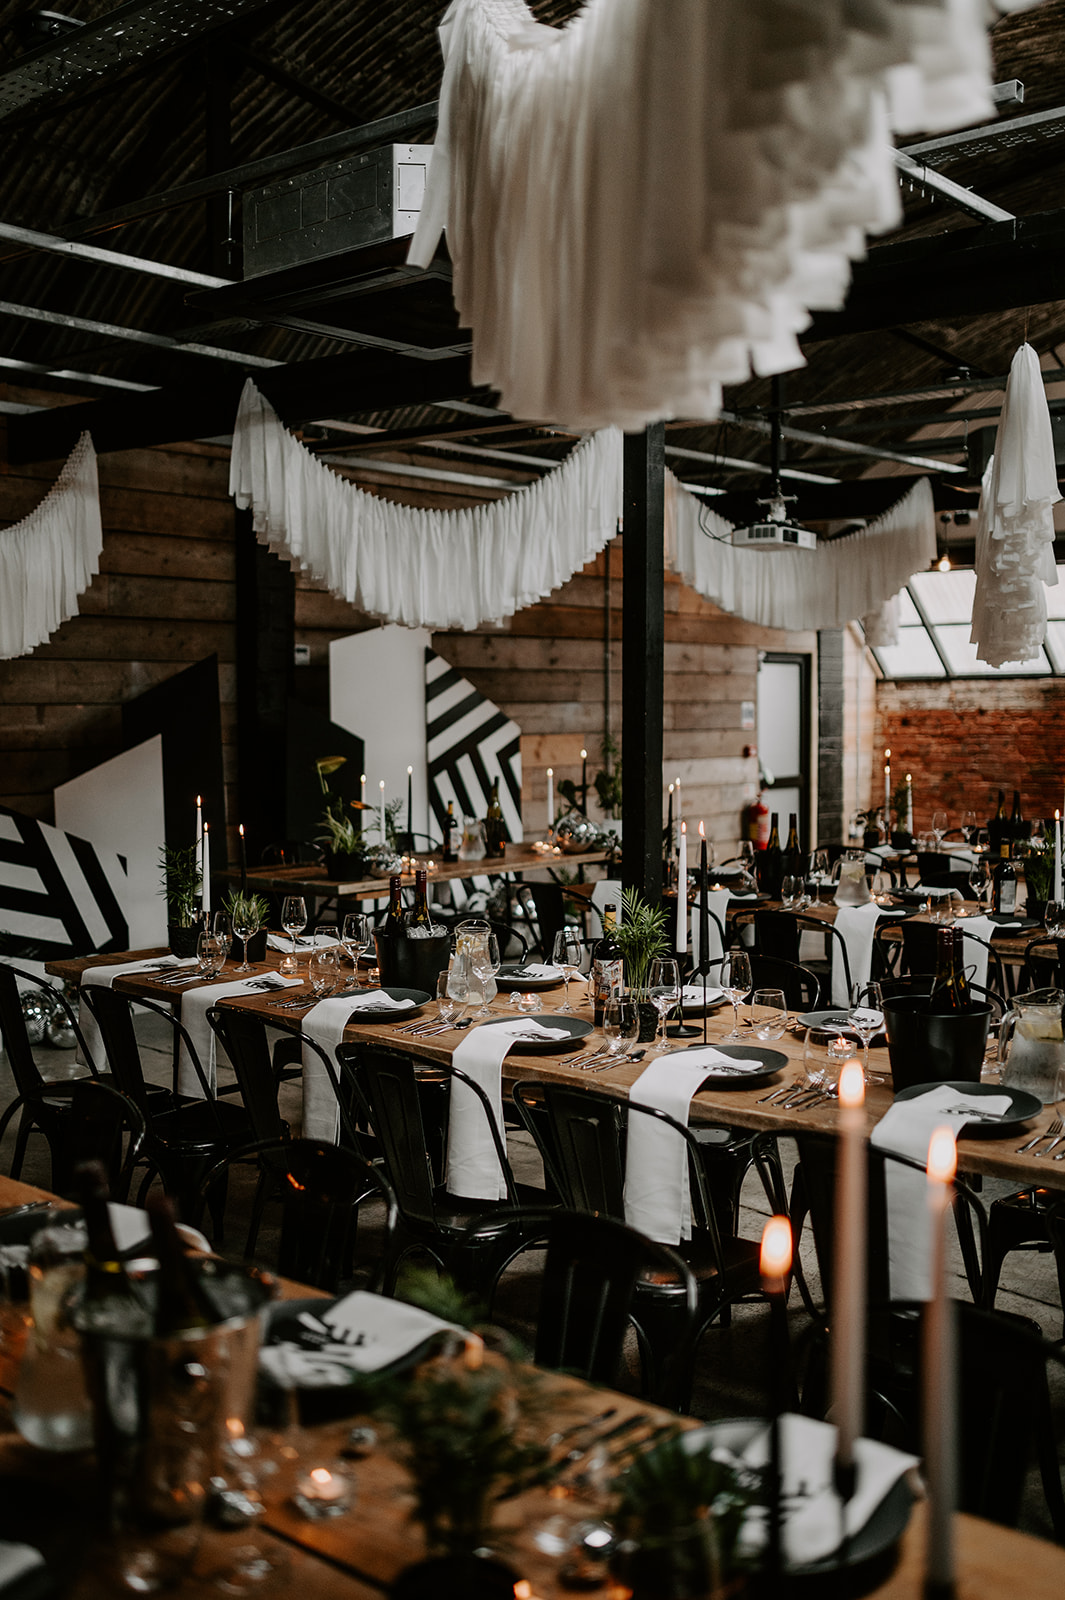 A industrial wedding venue filled with white streamers and black and white decor